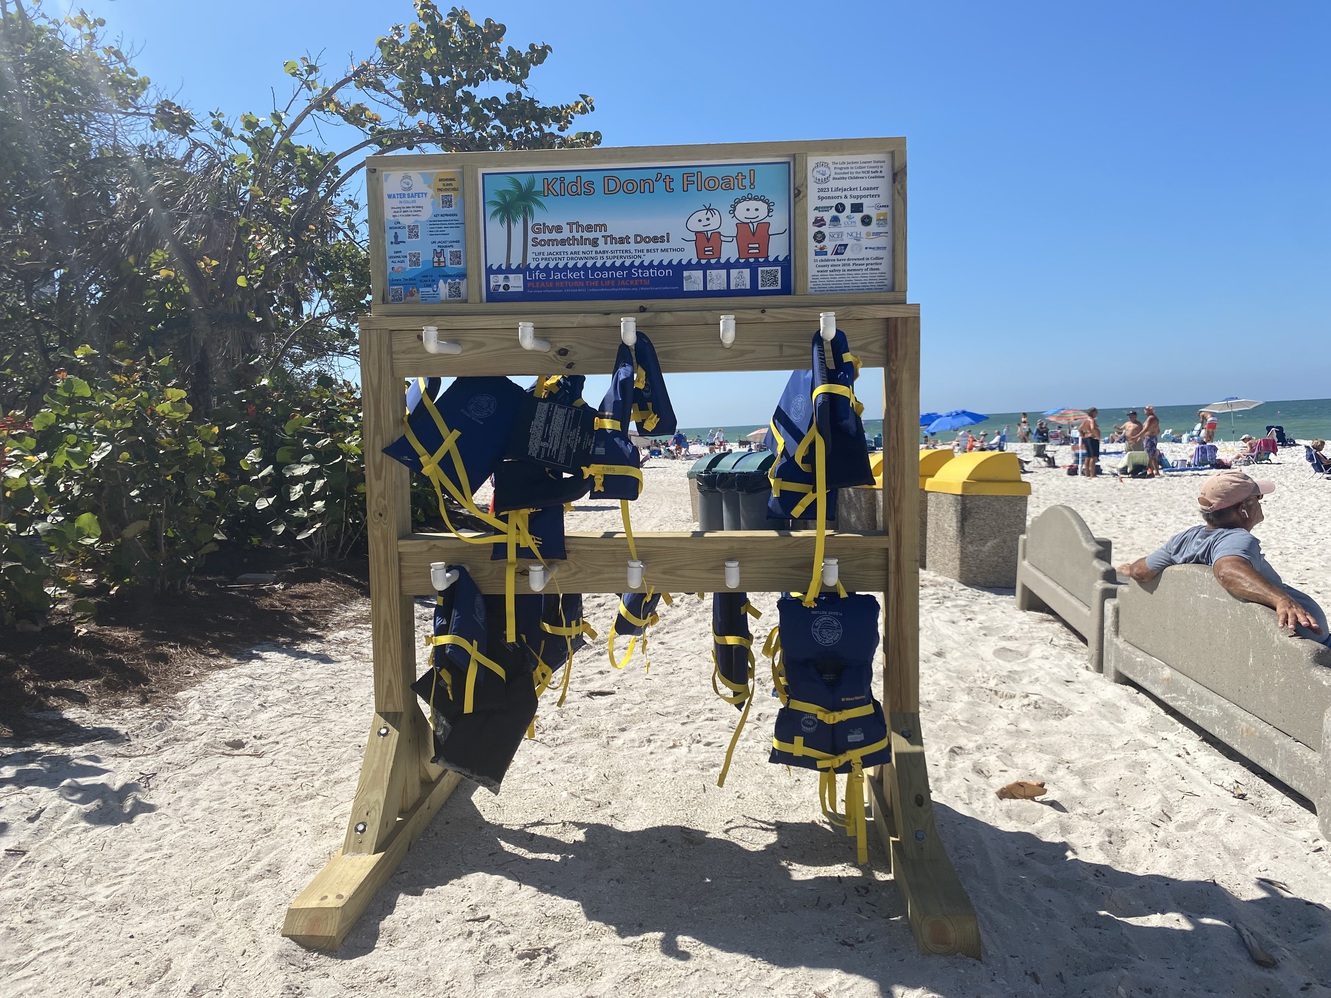 There are
      child-sized life jackets available for usage at Vandy Beach.